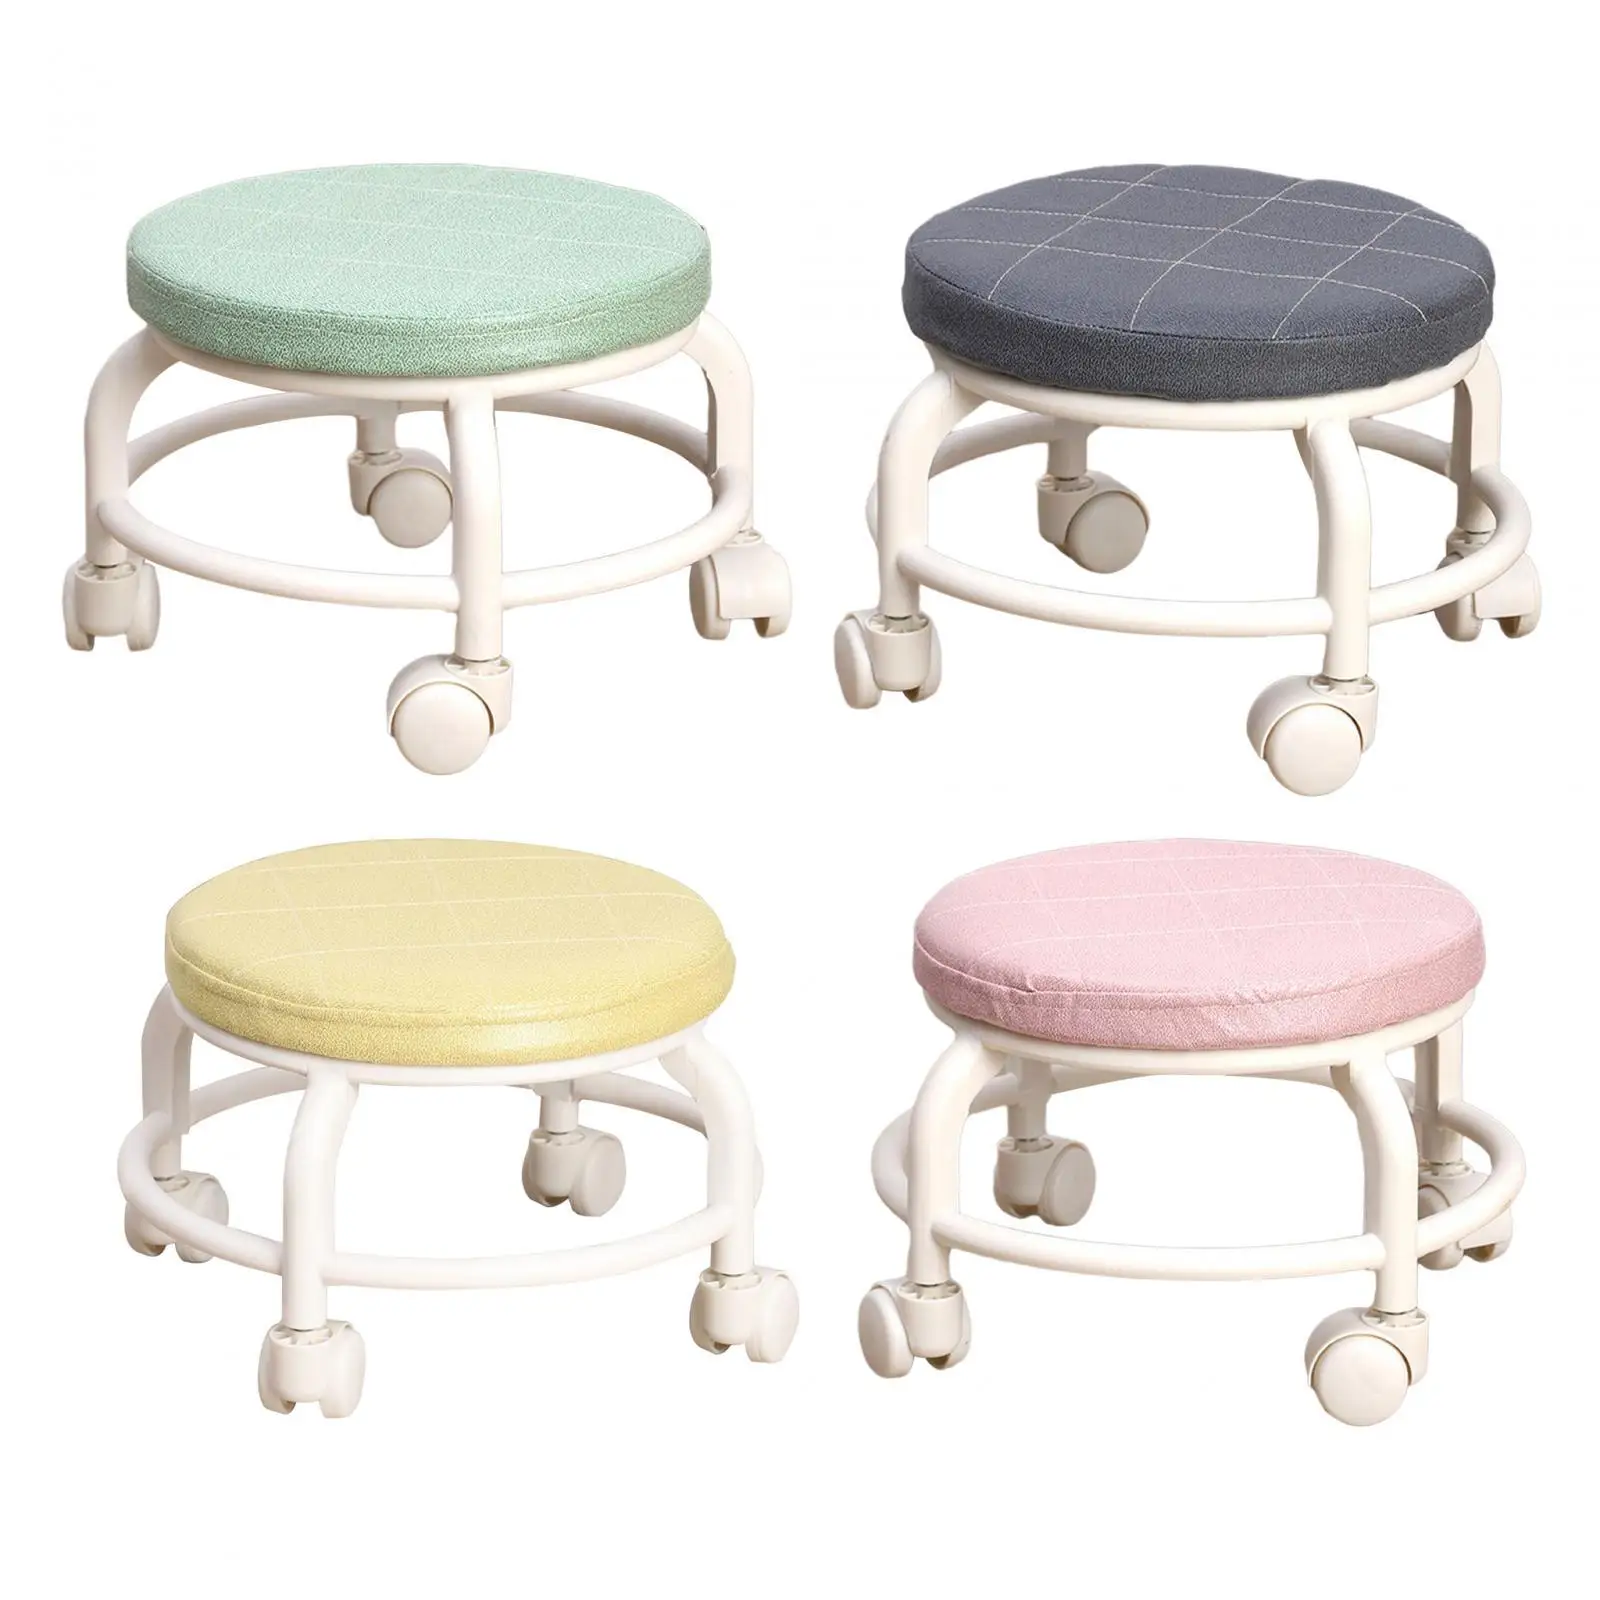 Low Roller Round Seat Heavy Duty 360 Degree Rotating Rolling Stool Pedicure Stool Shoe Stool Seat Salons Barber Office